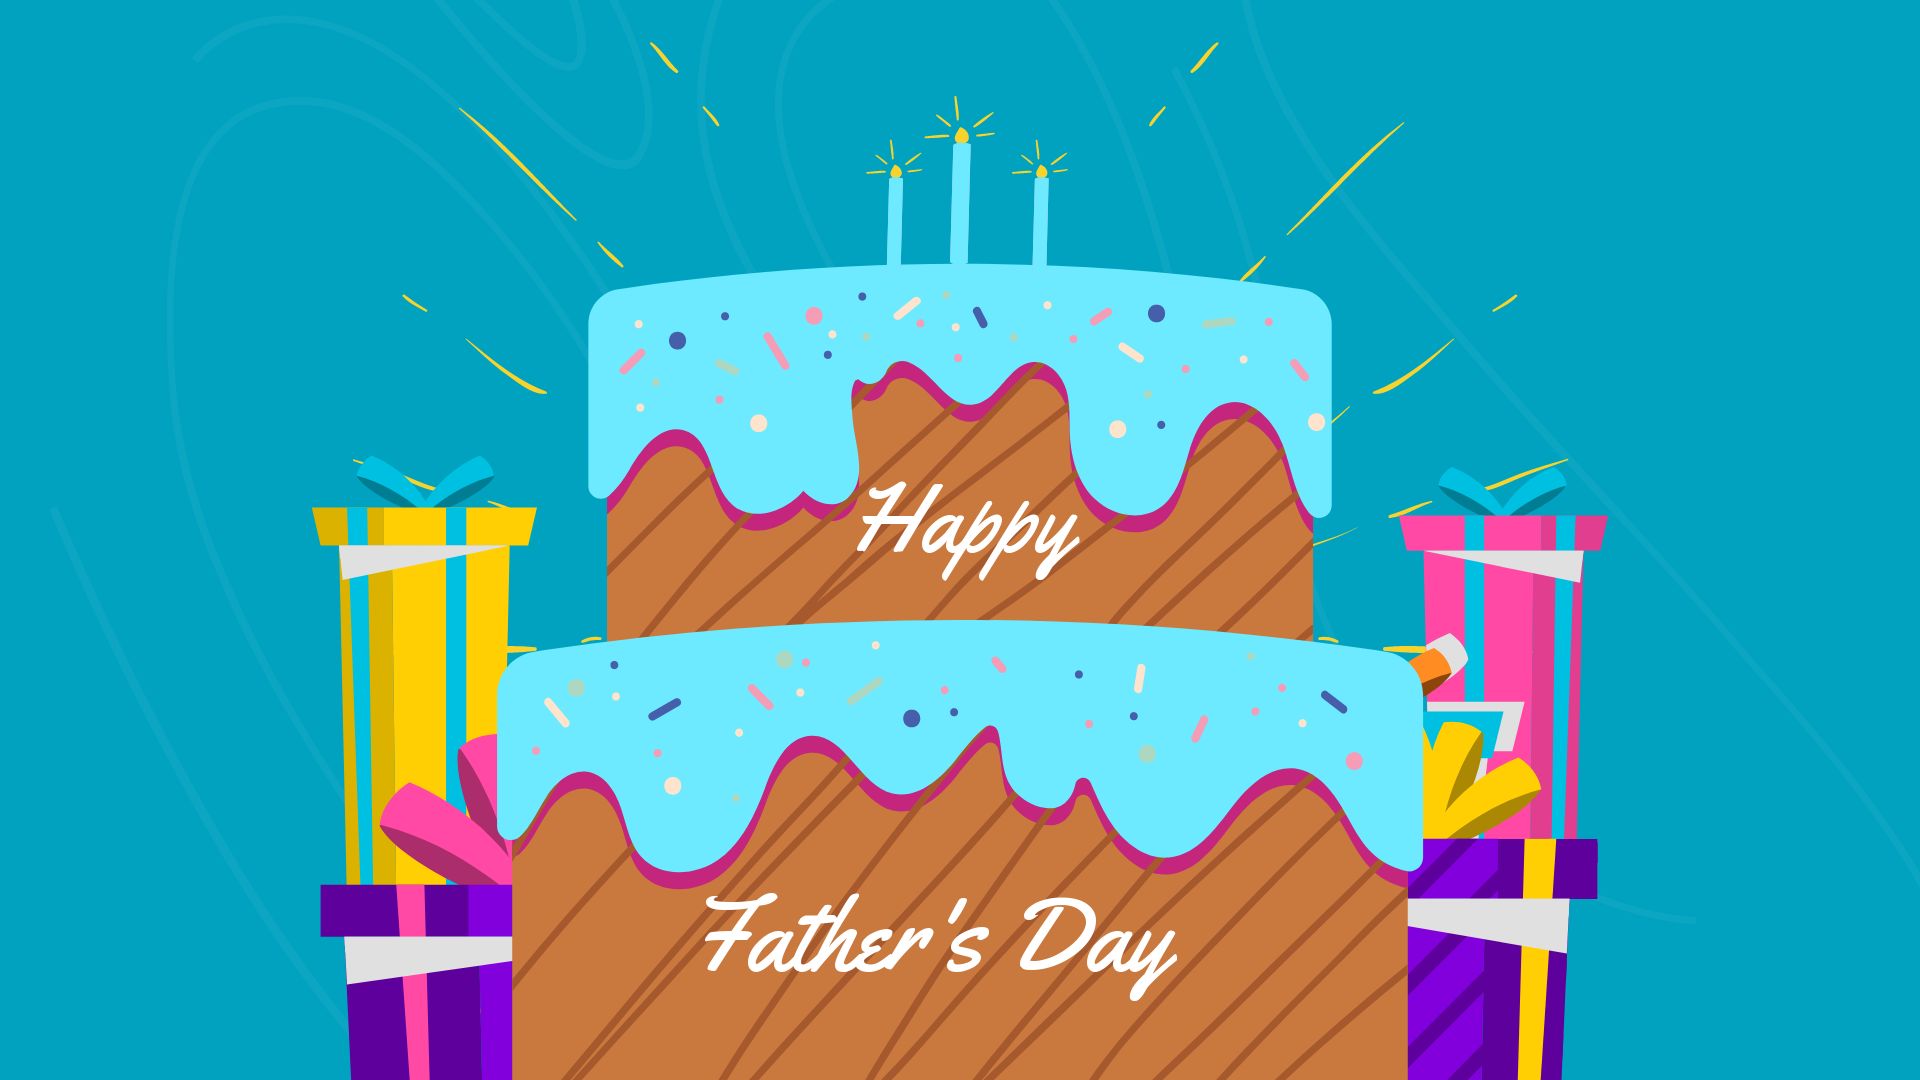 Happy Father's Day Cake Image